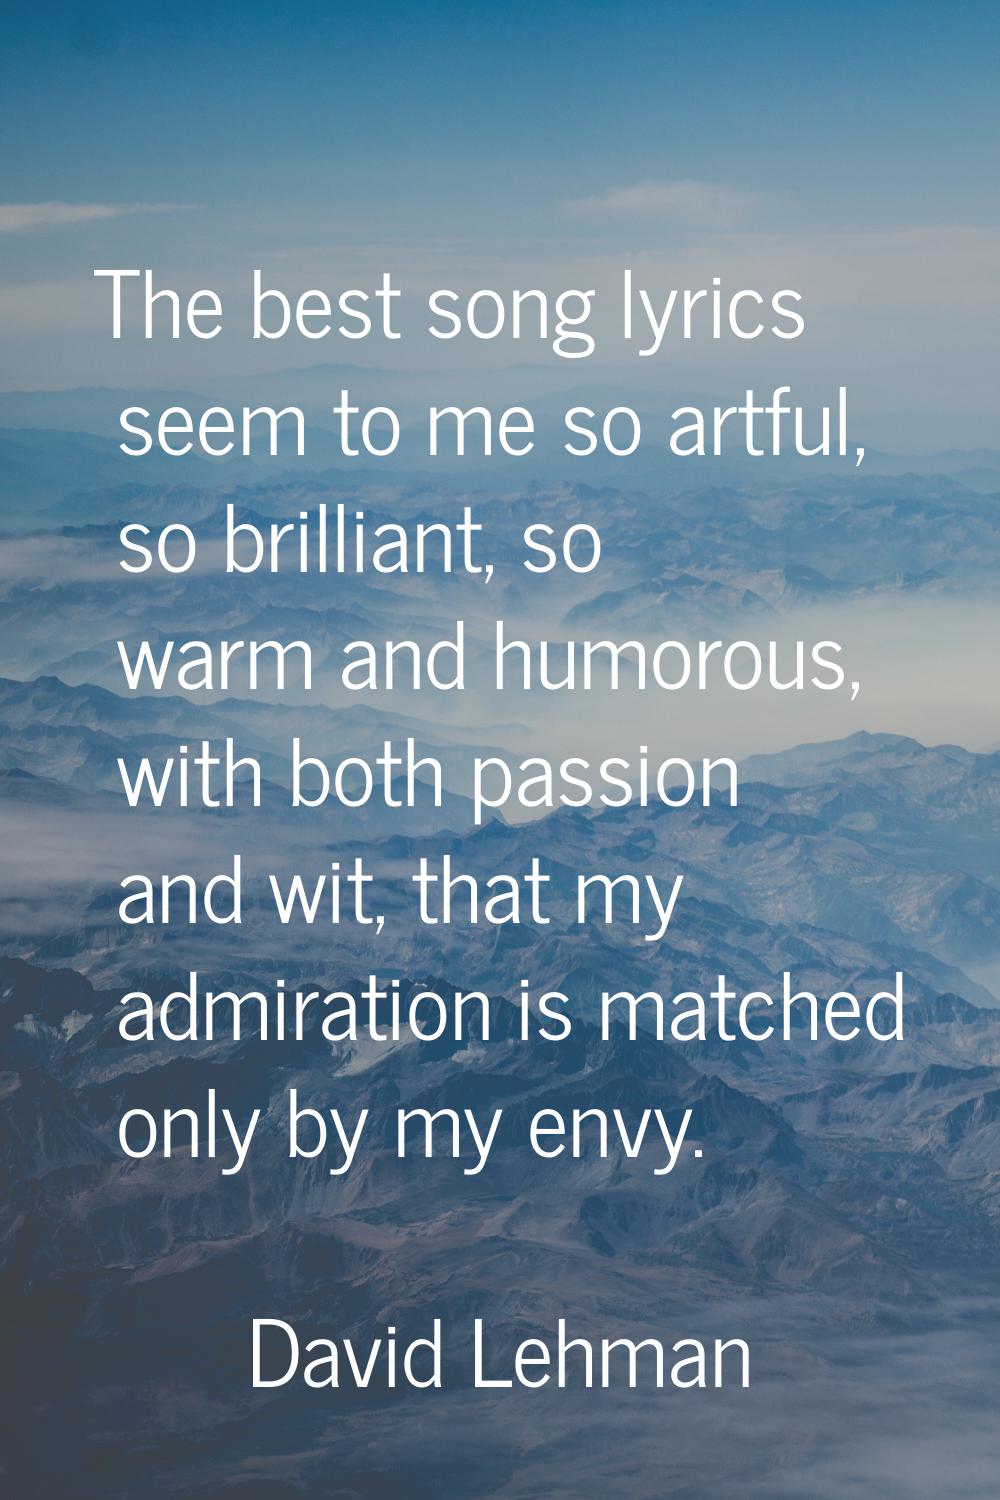 The best song lyrics seem to me so artful, so brilliant, so warm and humorous, with both passion an